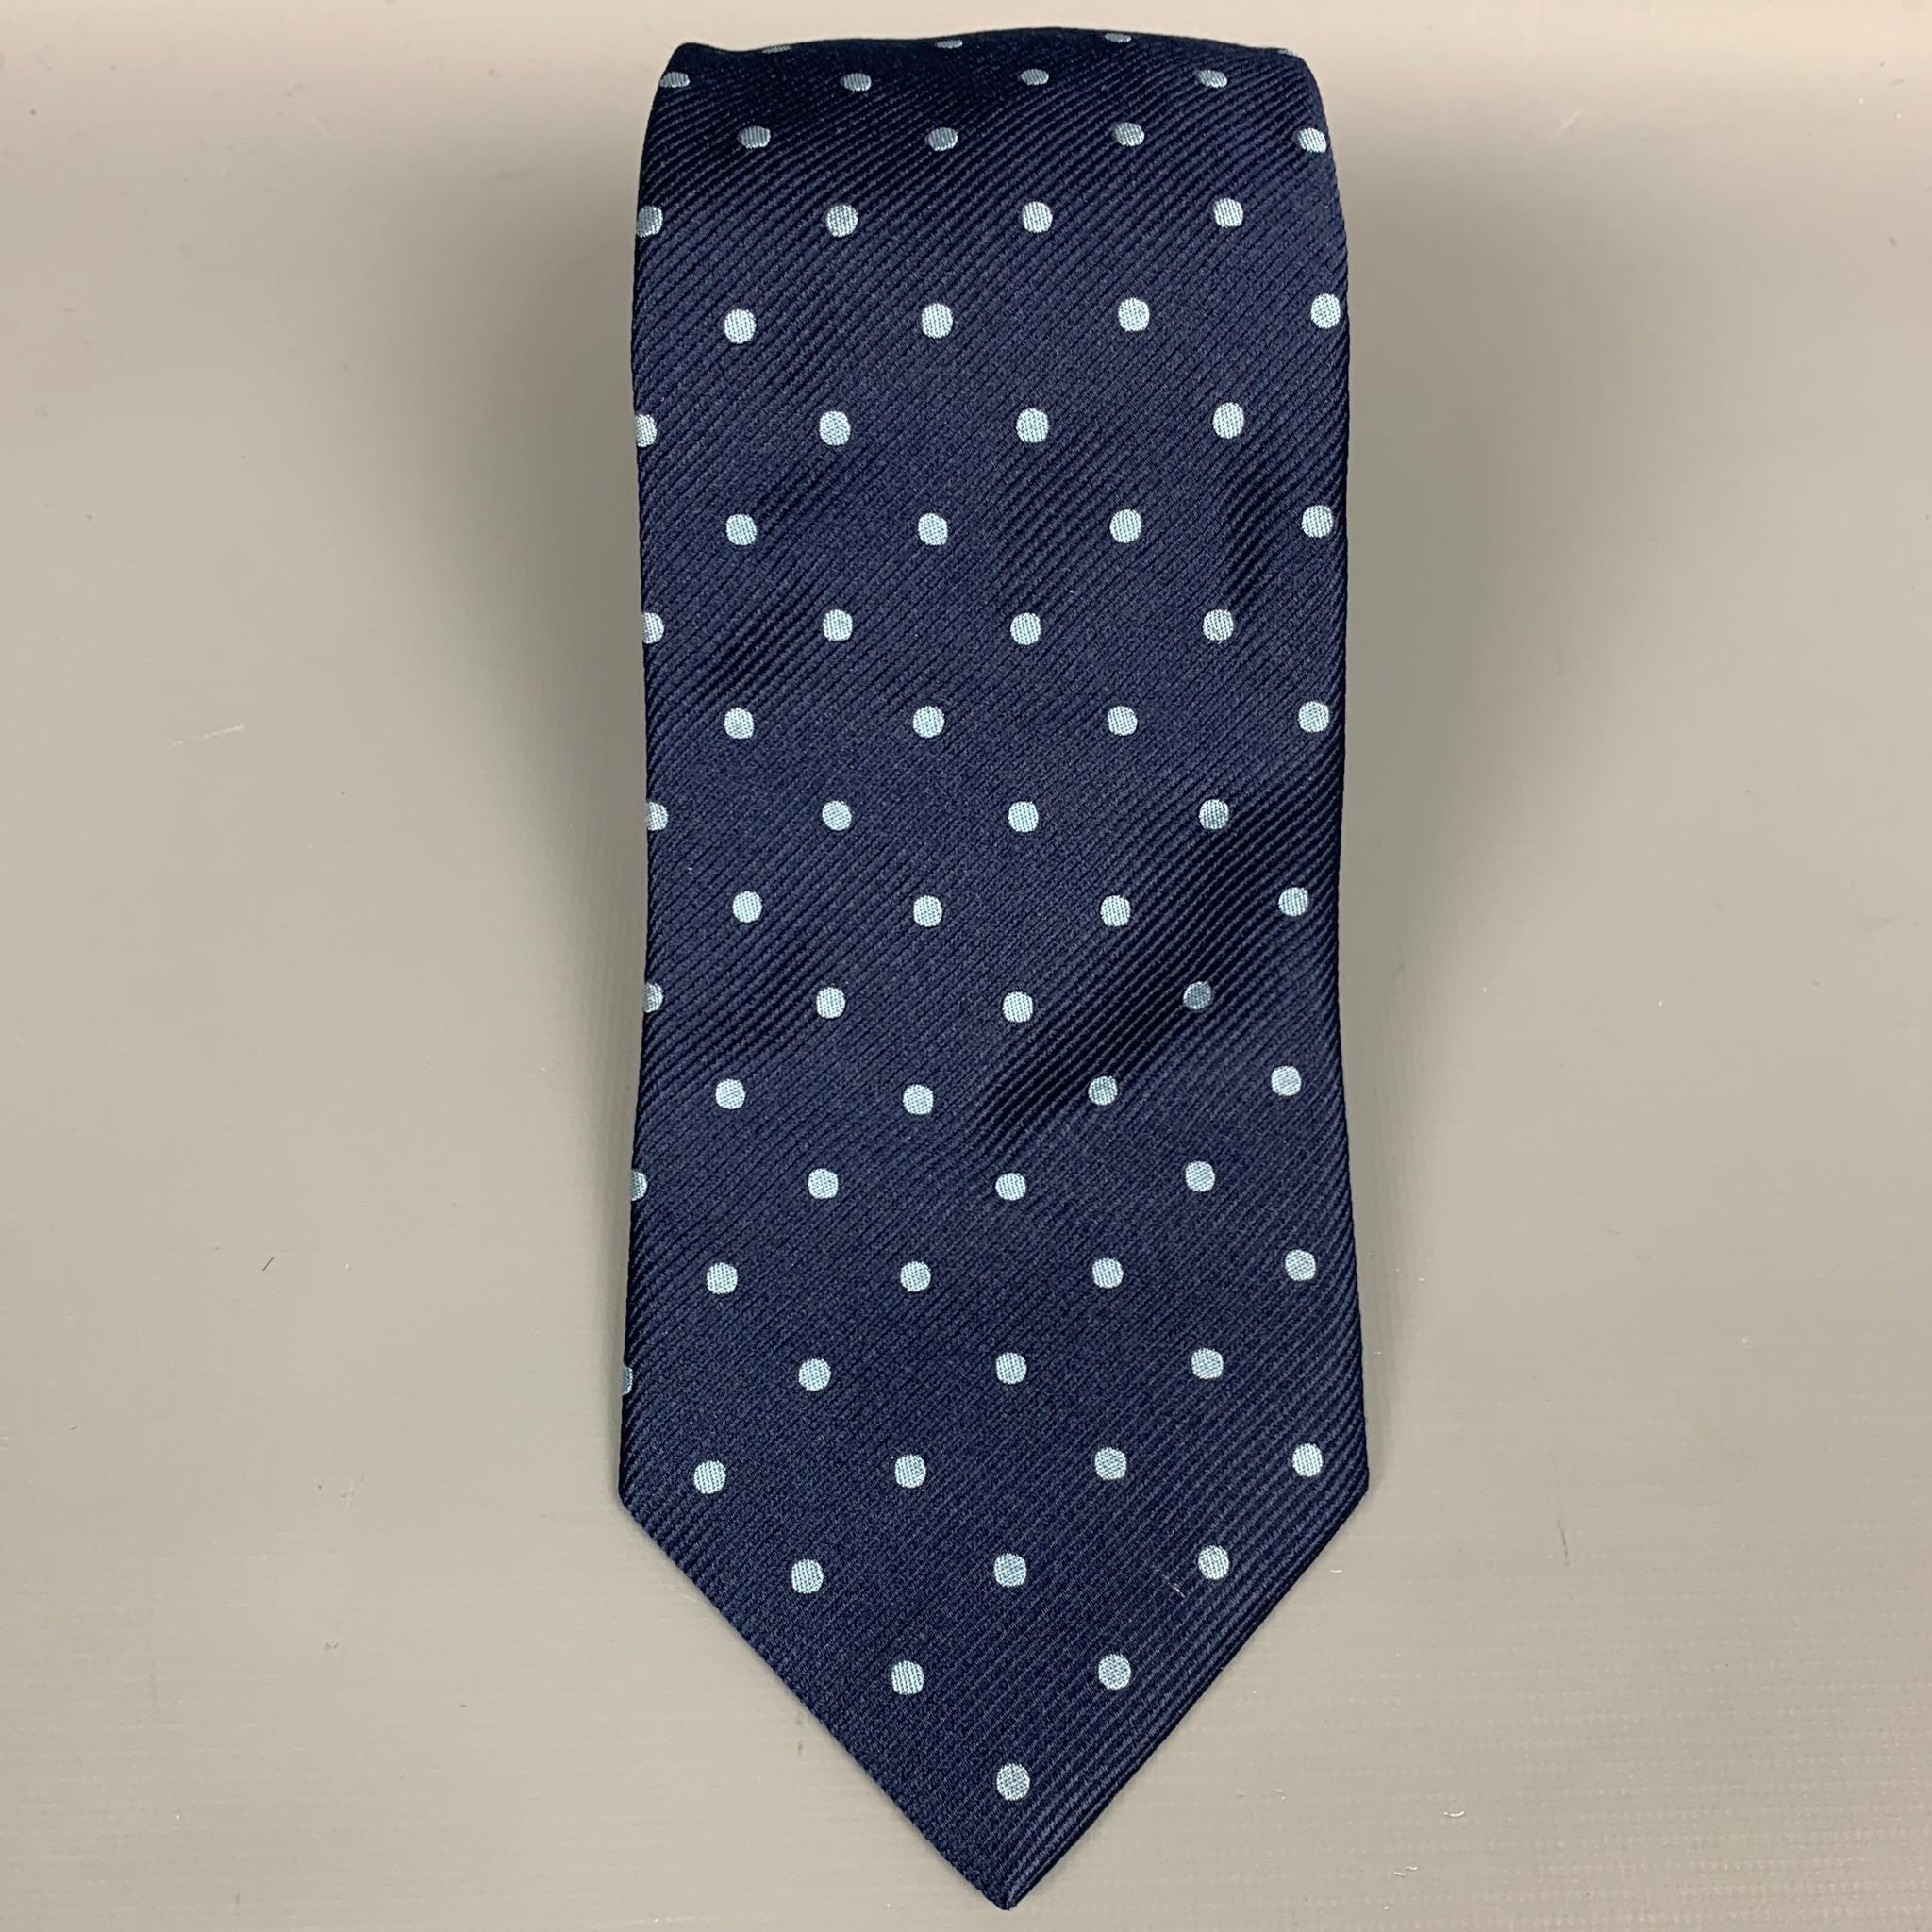 LUCIANO BARBERA neck tie comes in navy & light blue dot print silk. Made in Italy.

Very Good Pre-Owned Condition.

Measurements:

Width: 3 in.
 